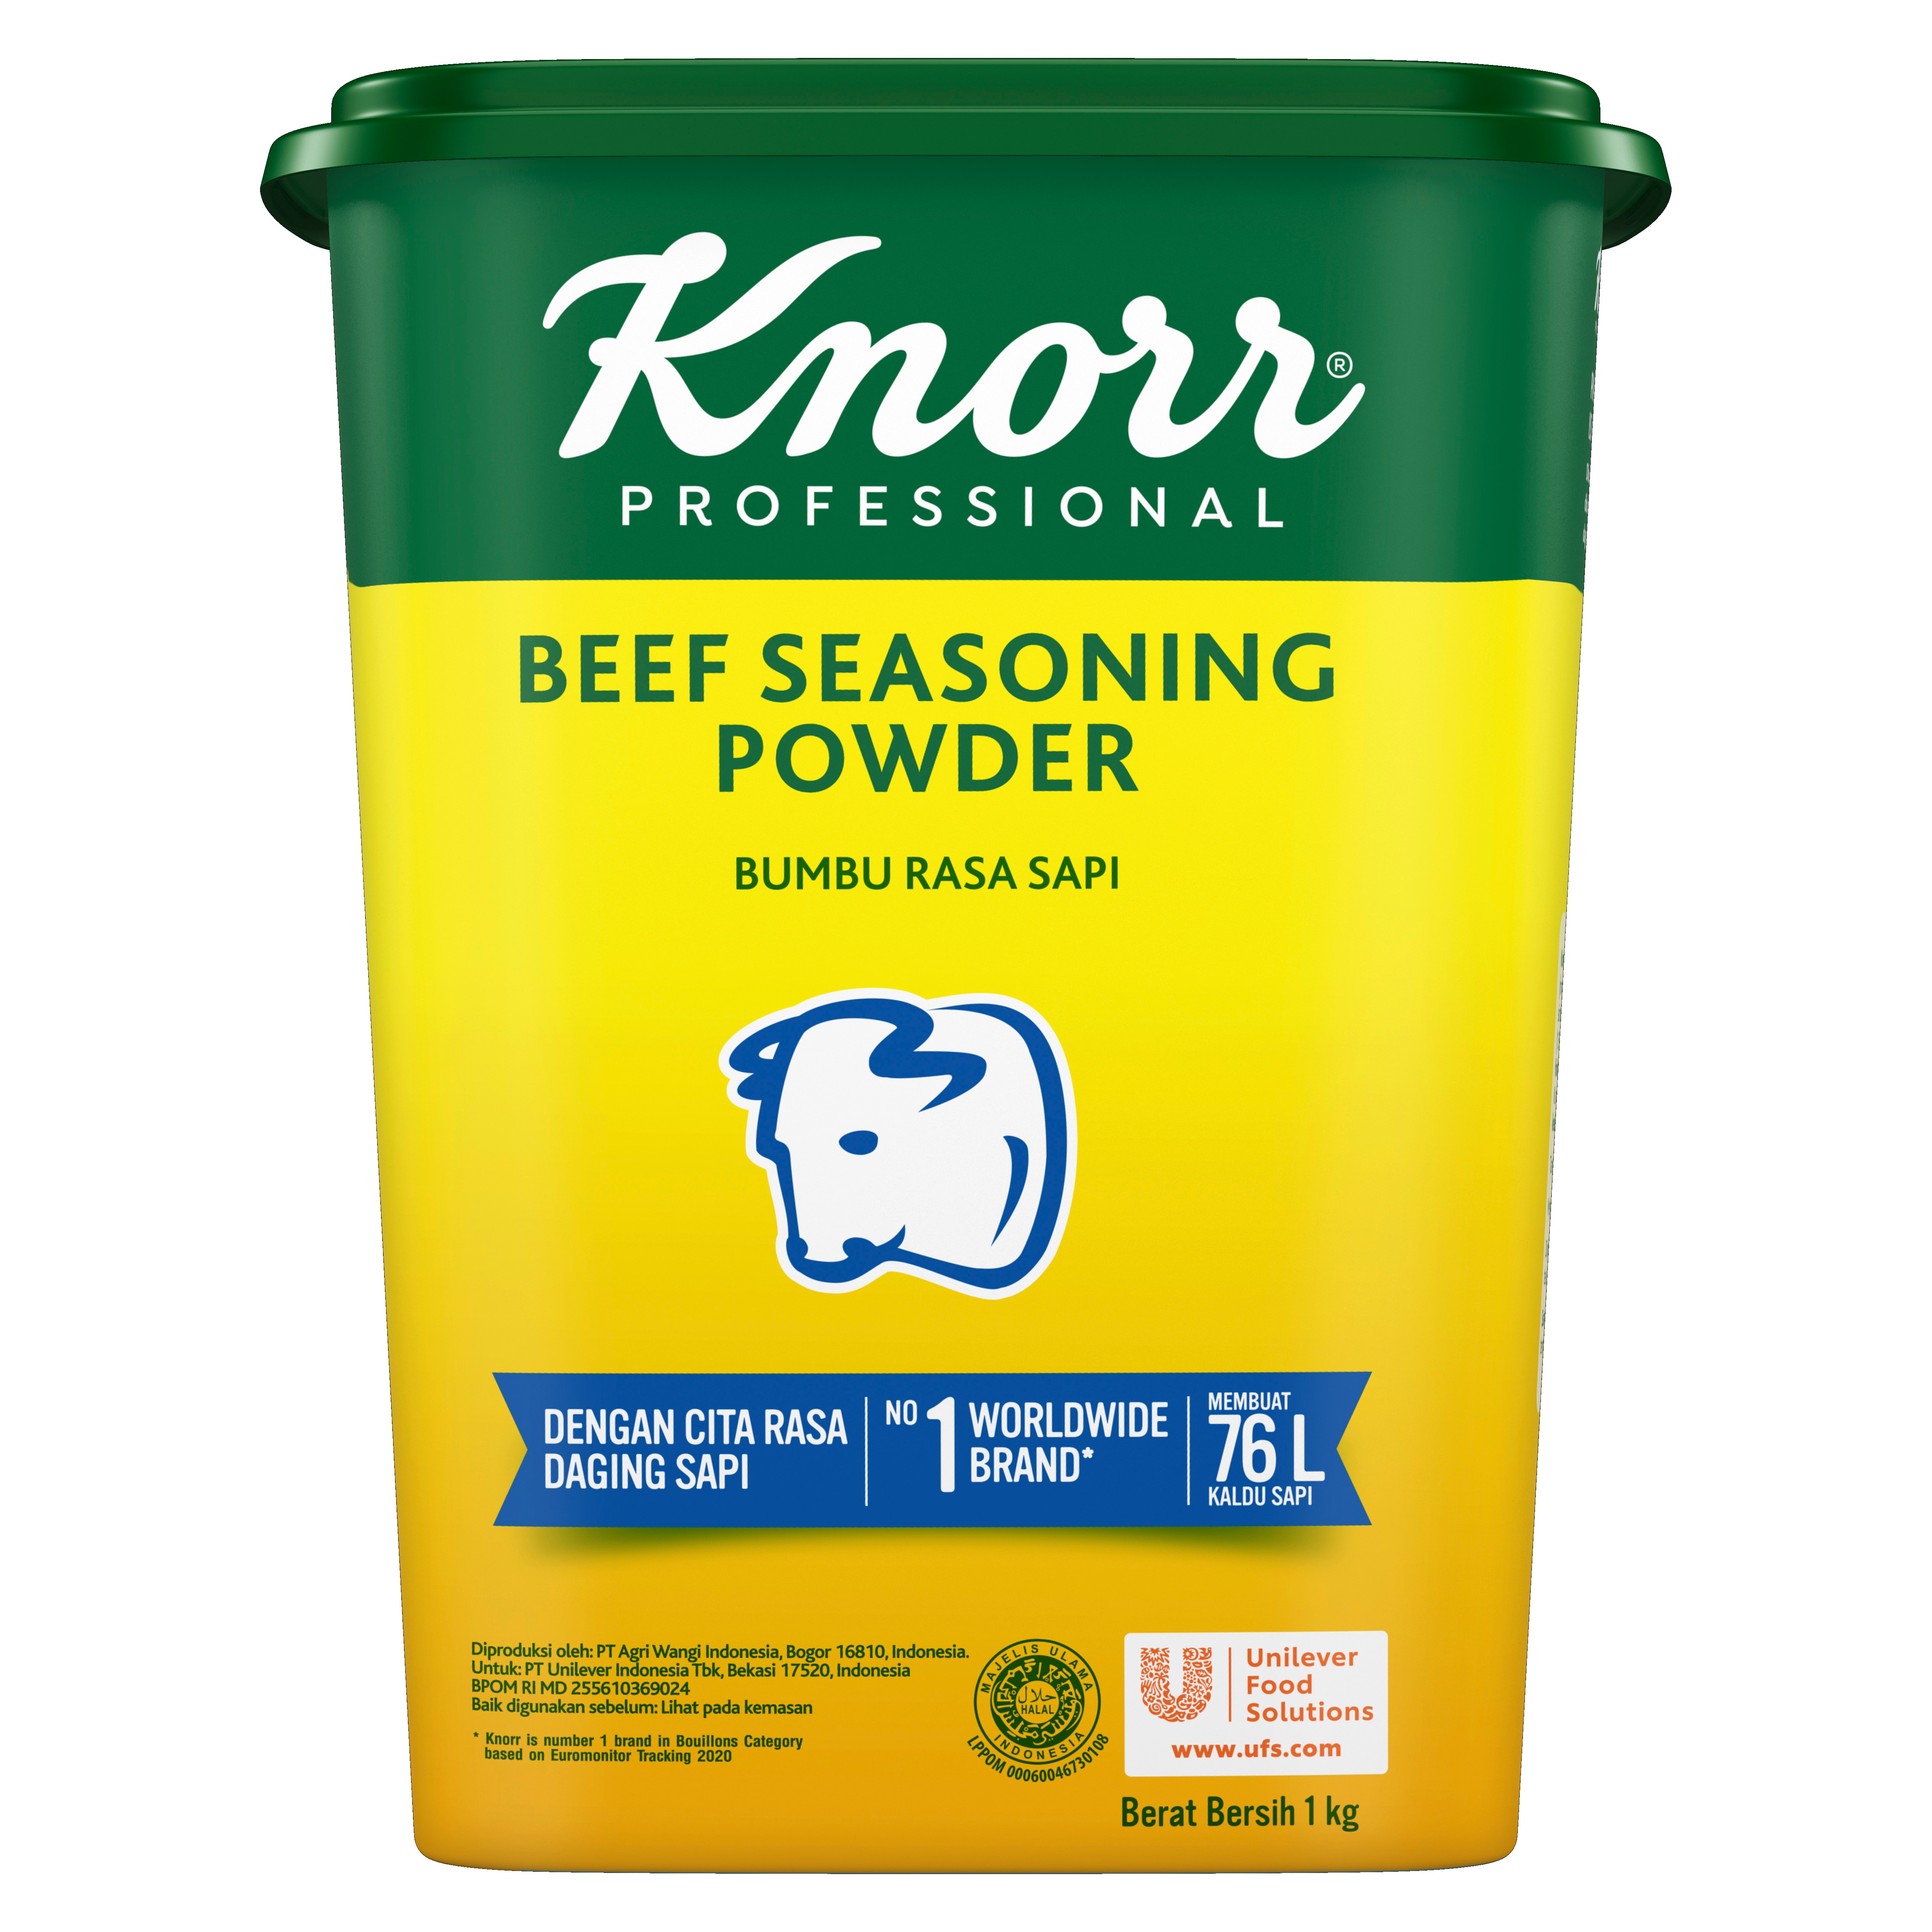 Knorr Beef Powder Tub 1kg - Knorr Beef Powder, with real beef extract will strengthen the overall taste of the dish